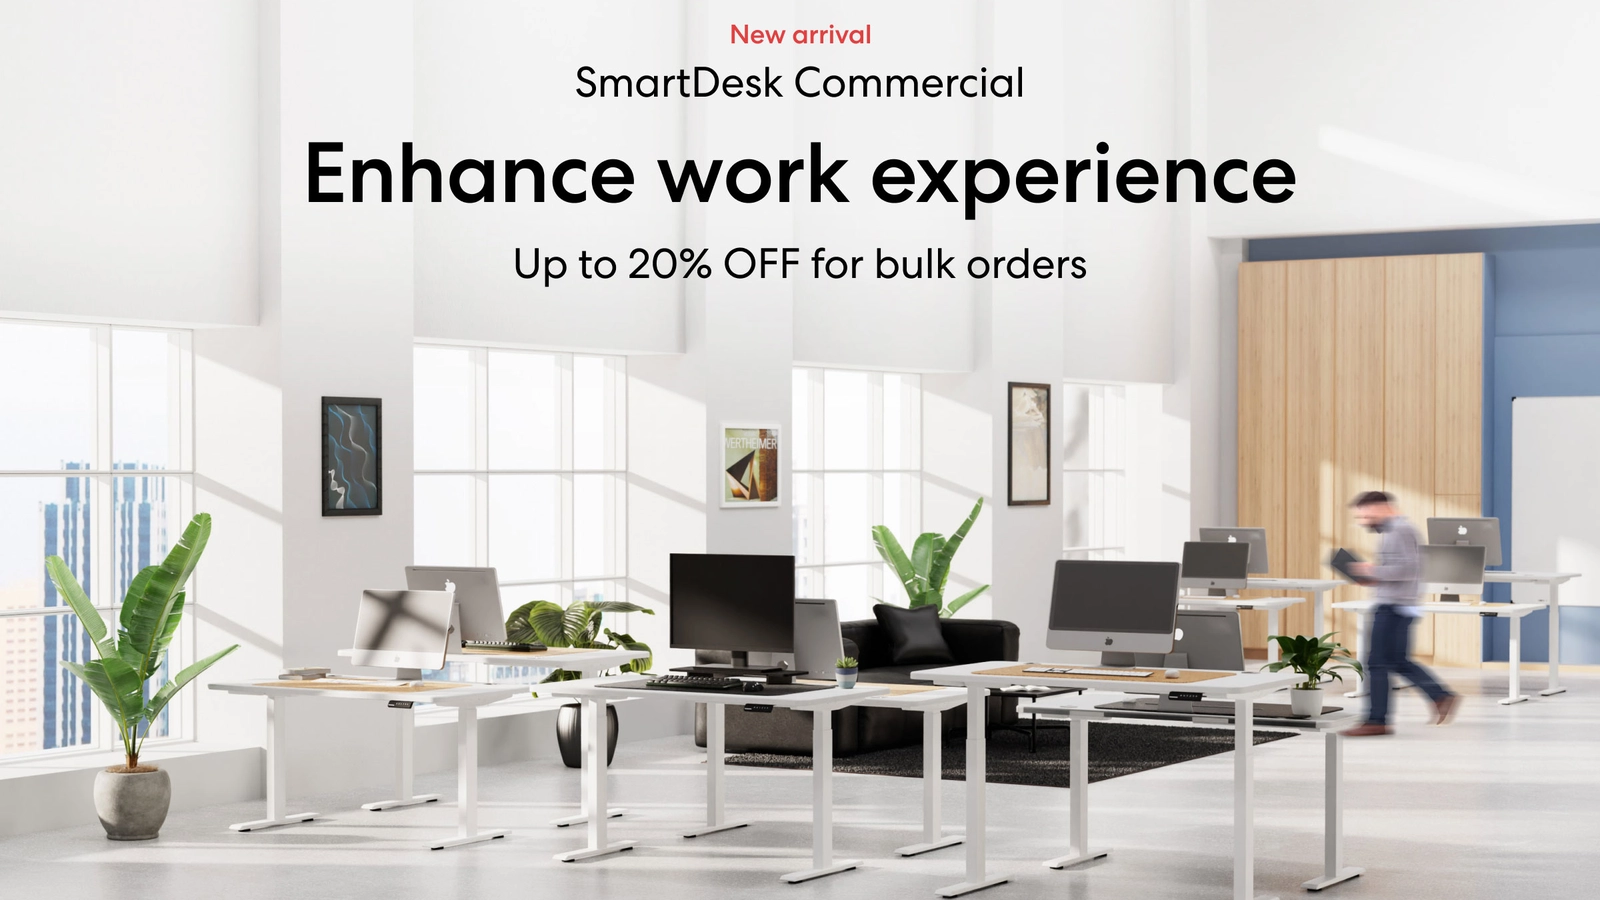 Introducing Autonomous Desk Commercial: Good for people, great for business